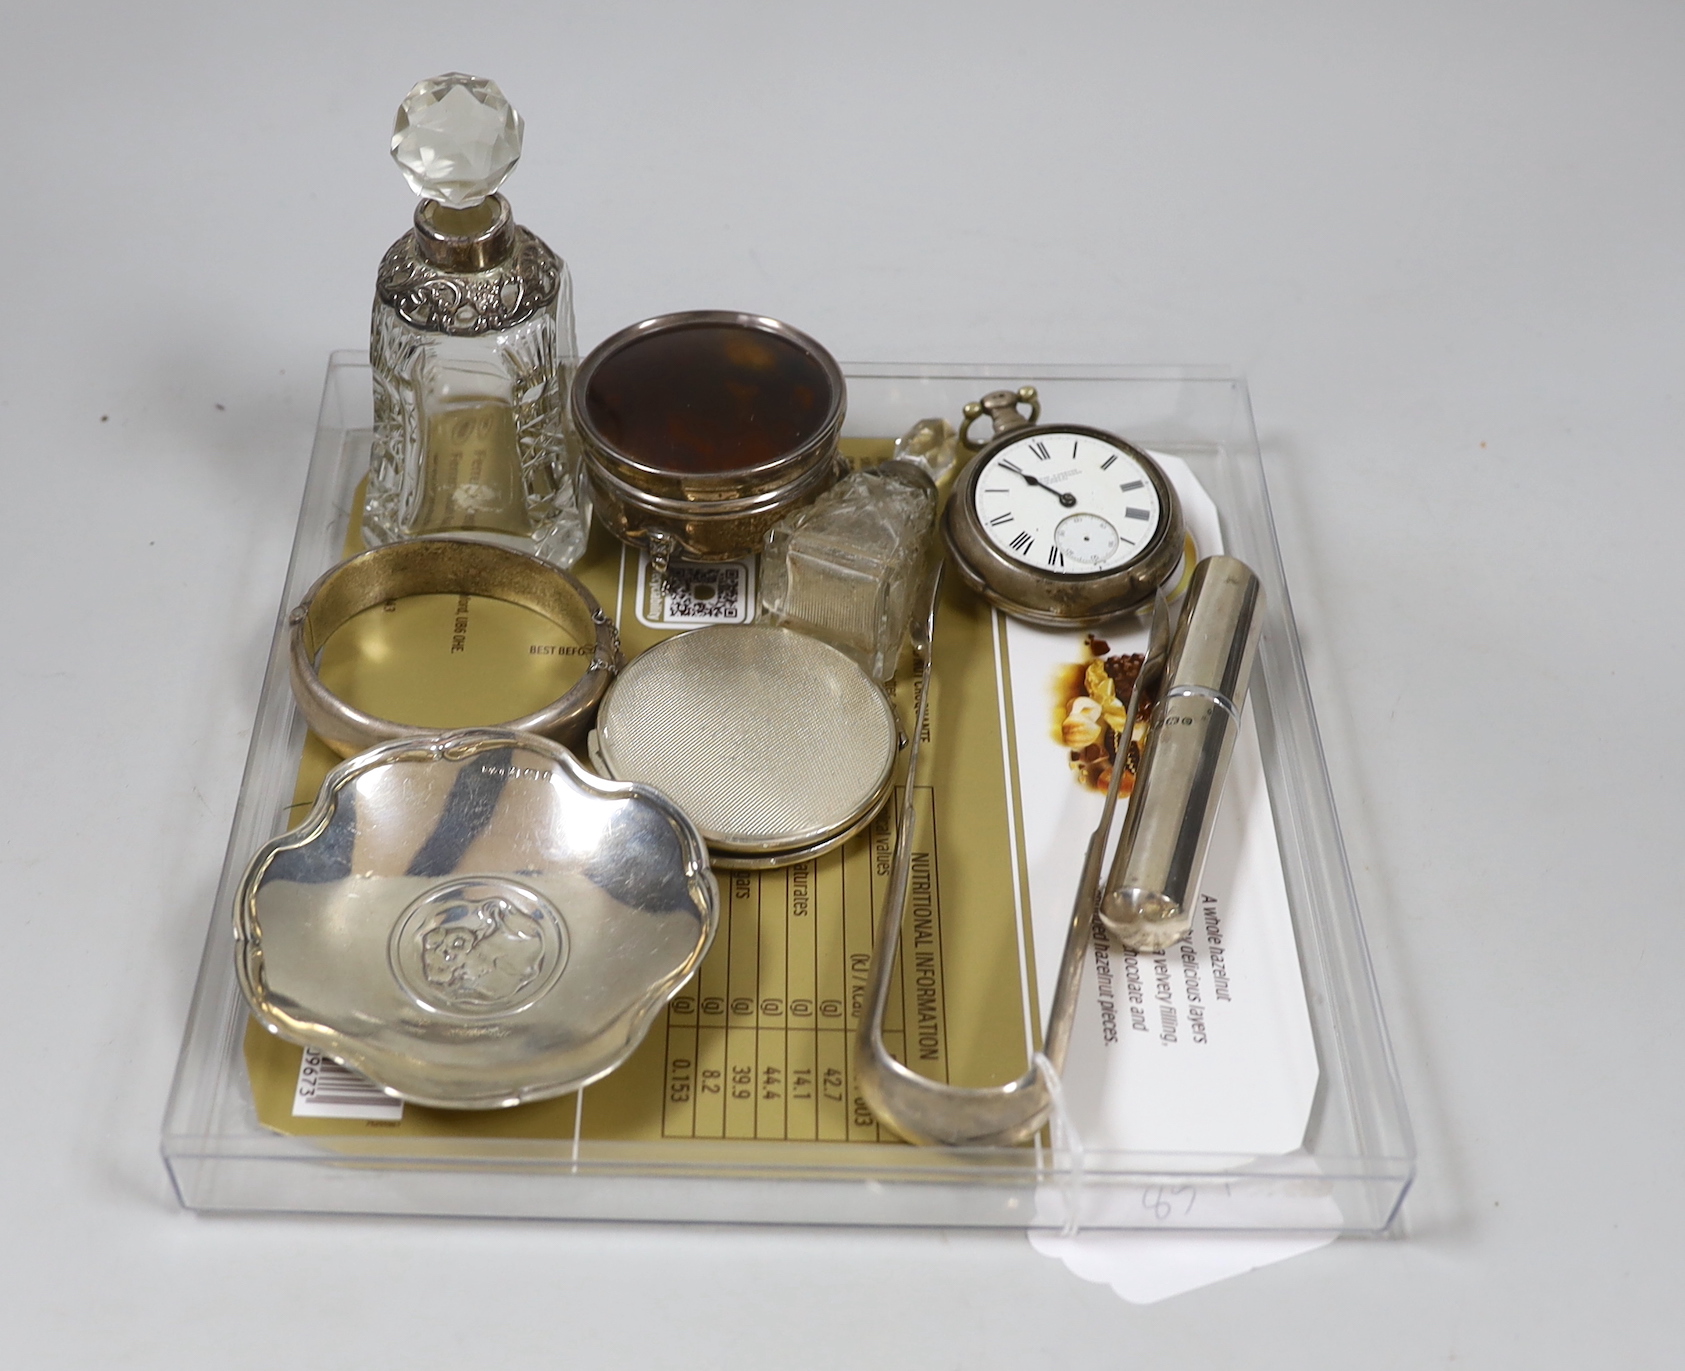 Sundry silver including a George V tortoiseshell mounted trinket box, diameter 6cm, two mounted glass scent bottles, modern atomiser, tongs, dish, compact, bangle and a verge pocket watch.